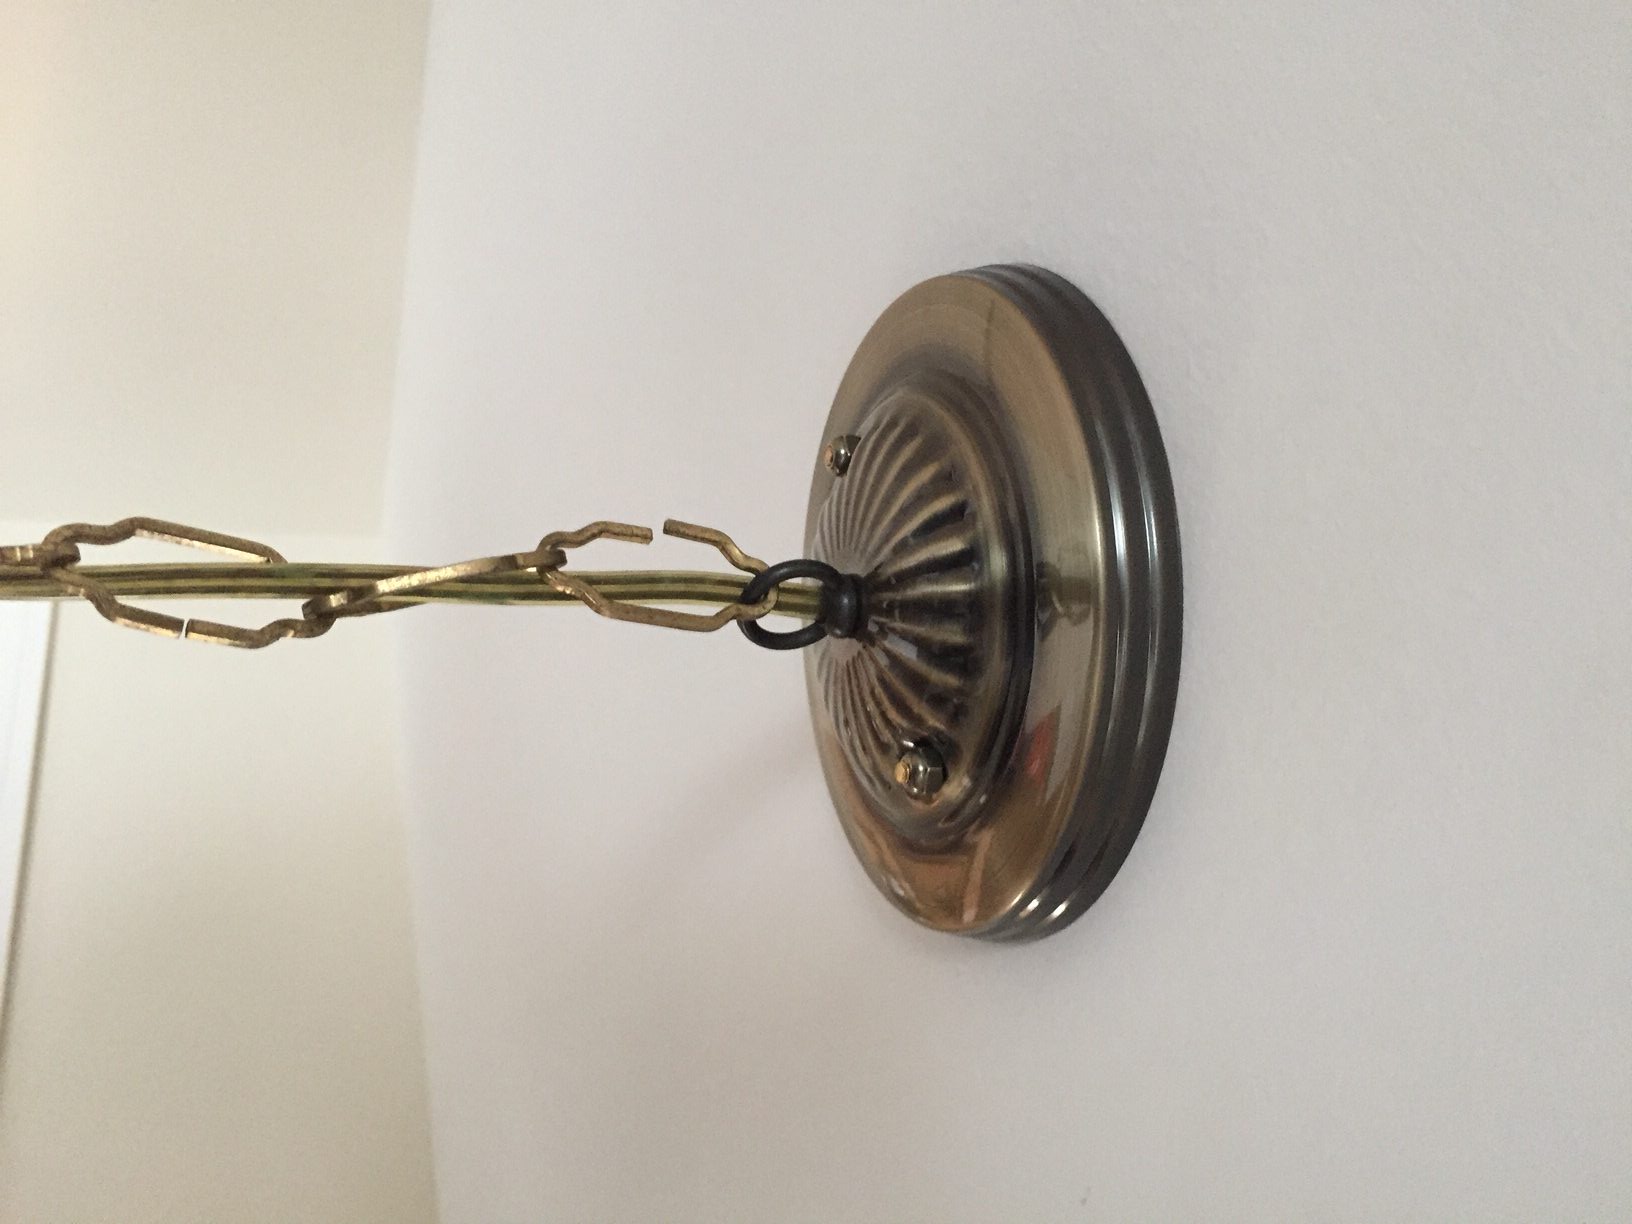 Mounting a new ceiling light